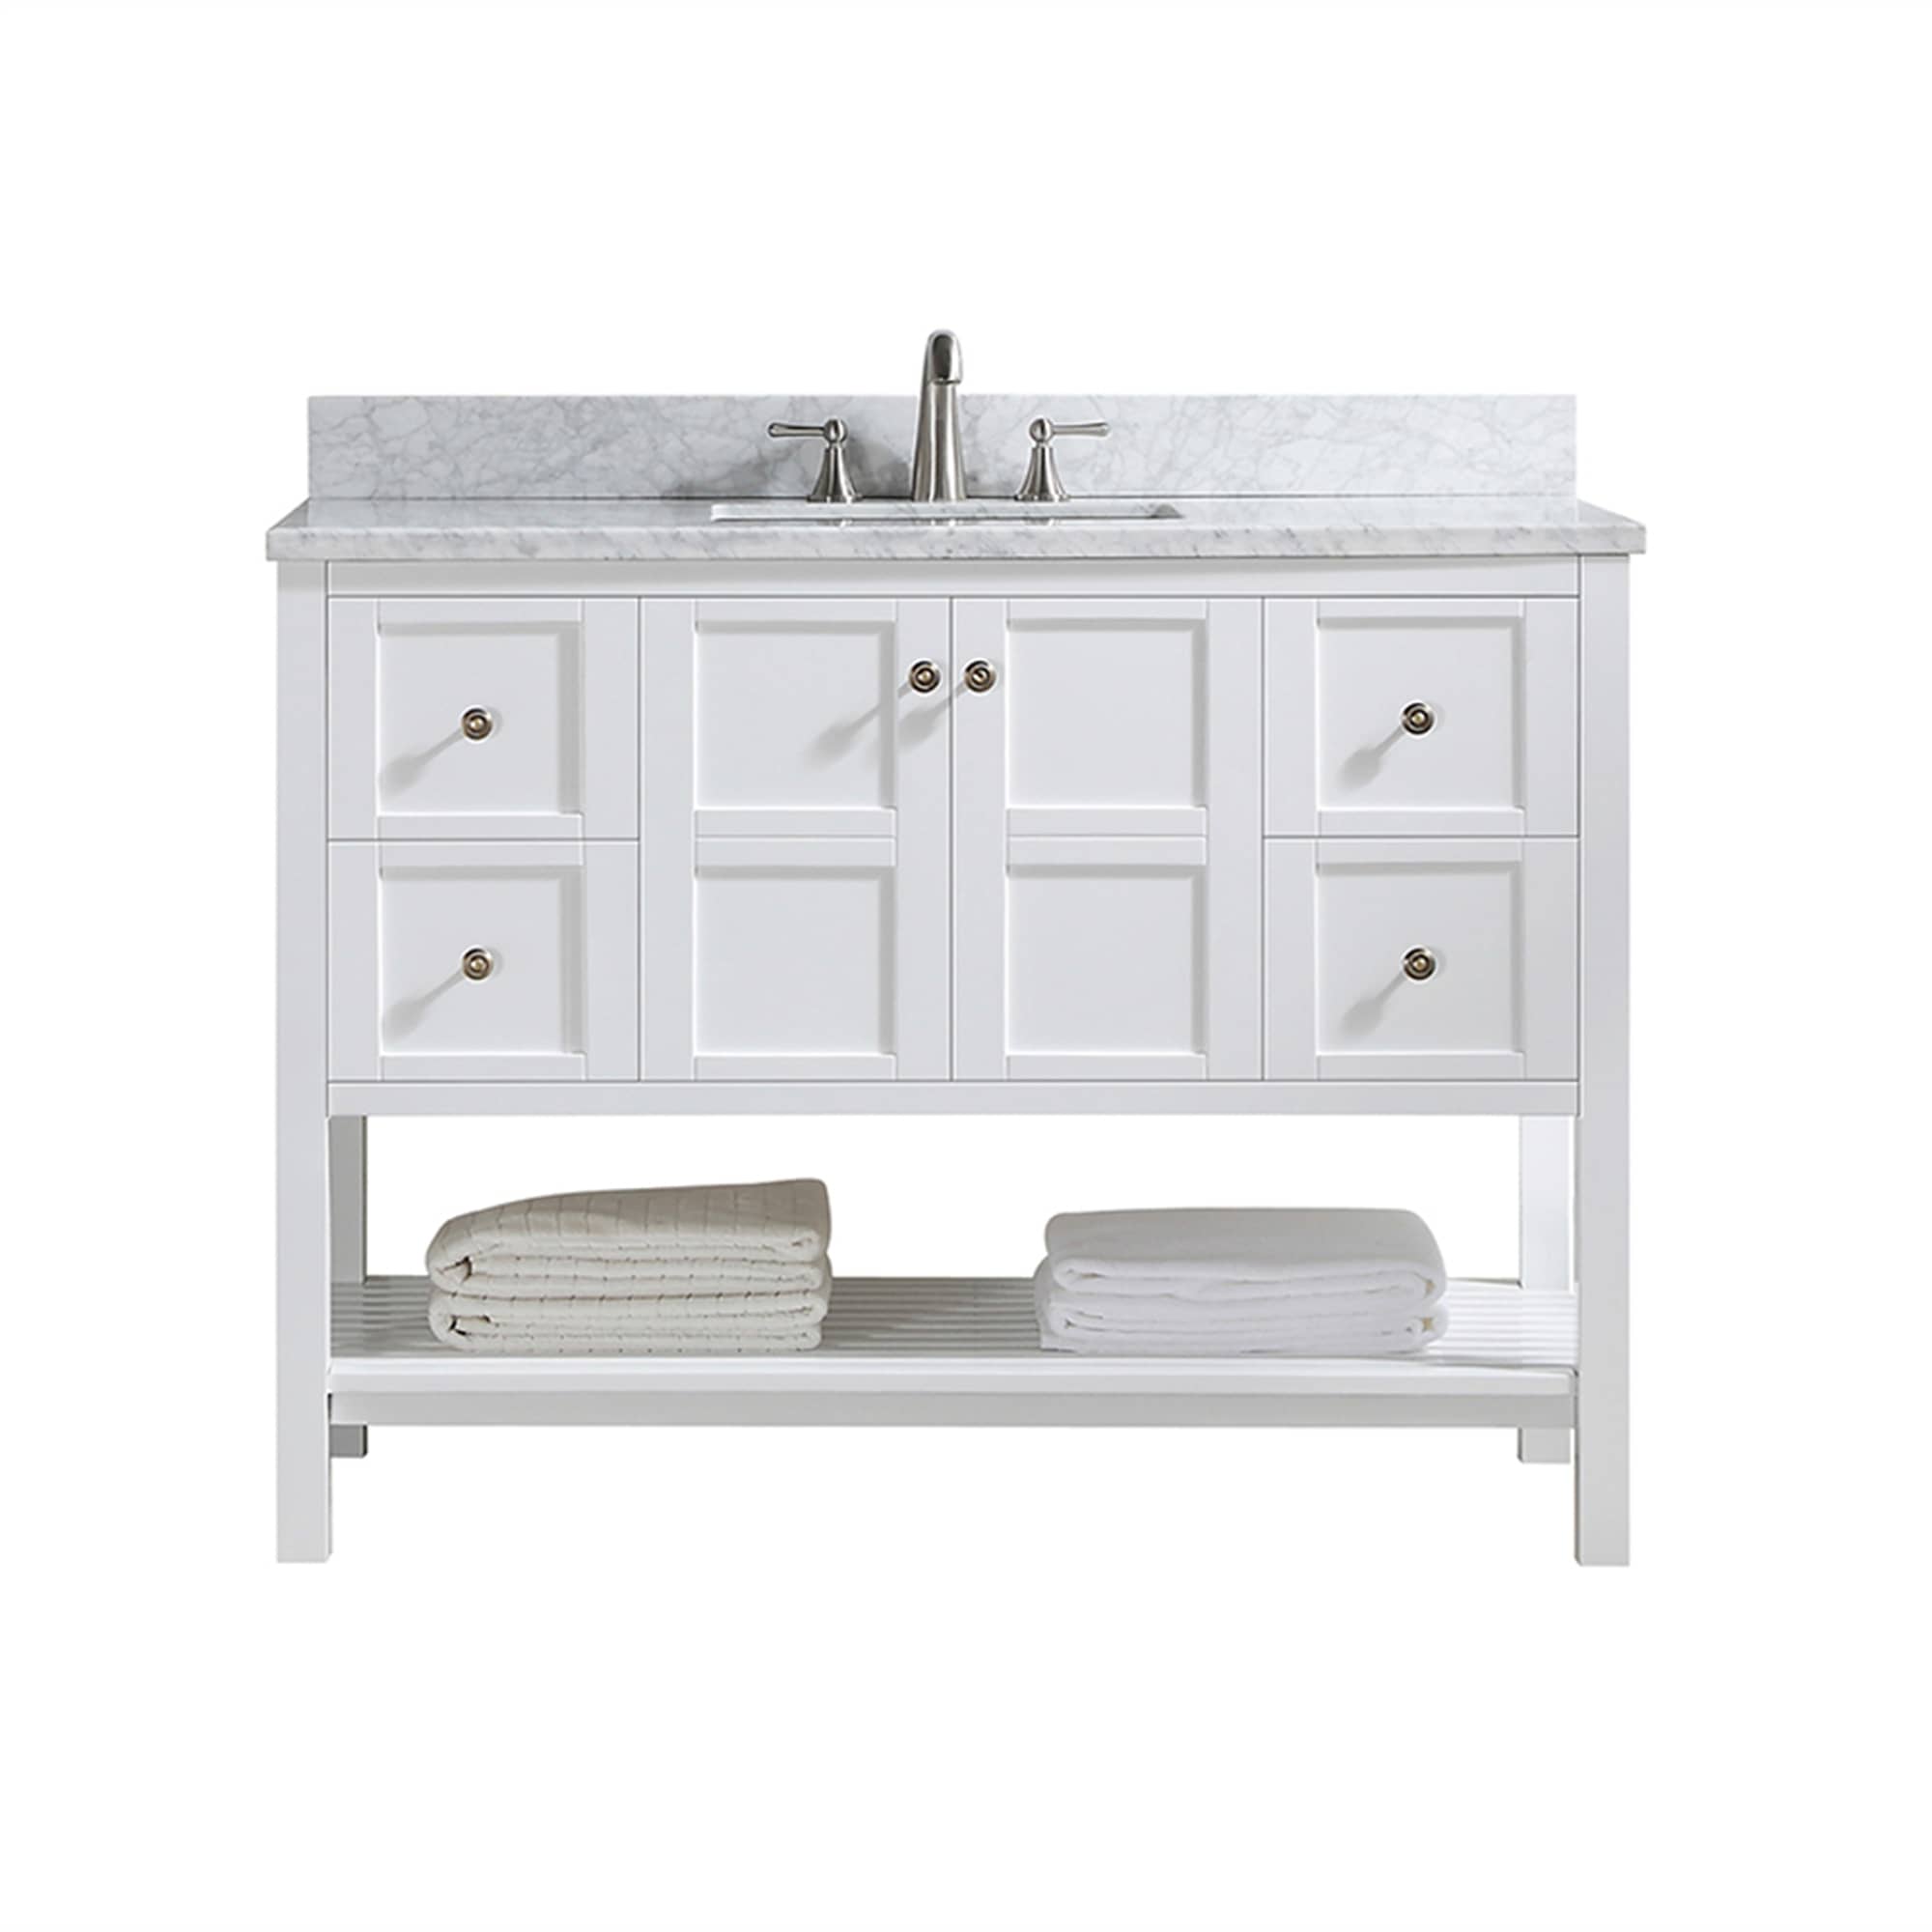 CASAINC 48 Inch Bath Vanity in White with White Top and Basin (48W x 22D x 35.4"H )-Casainc Canada